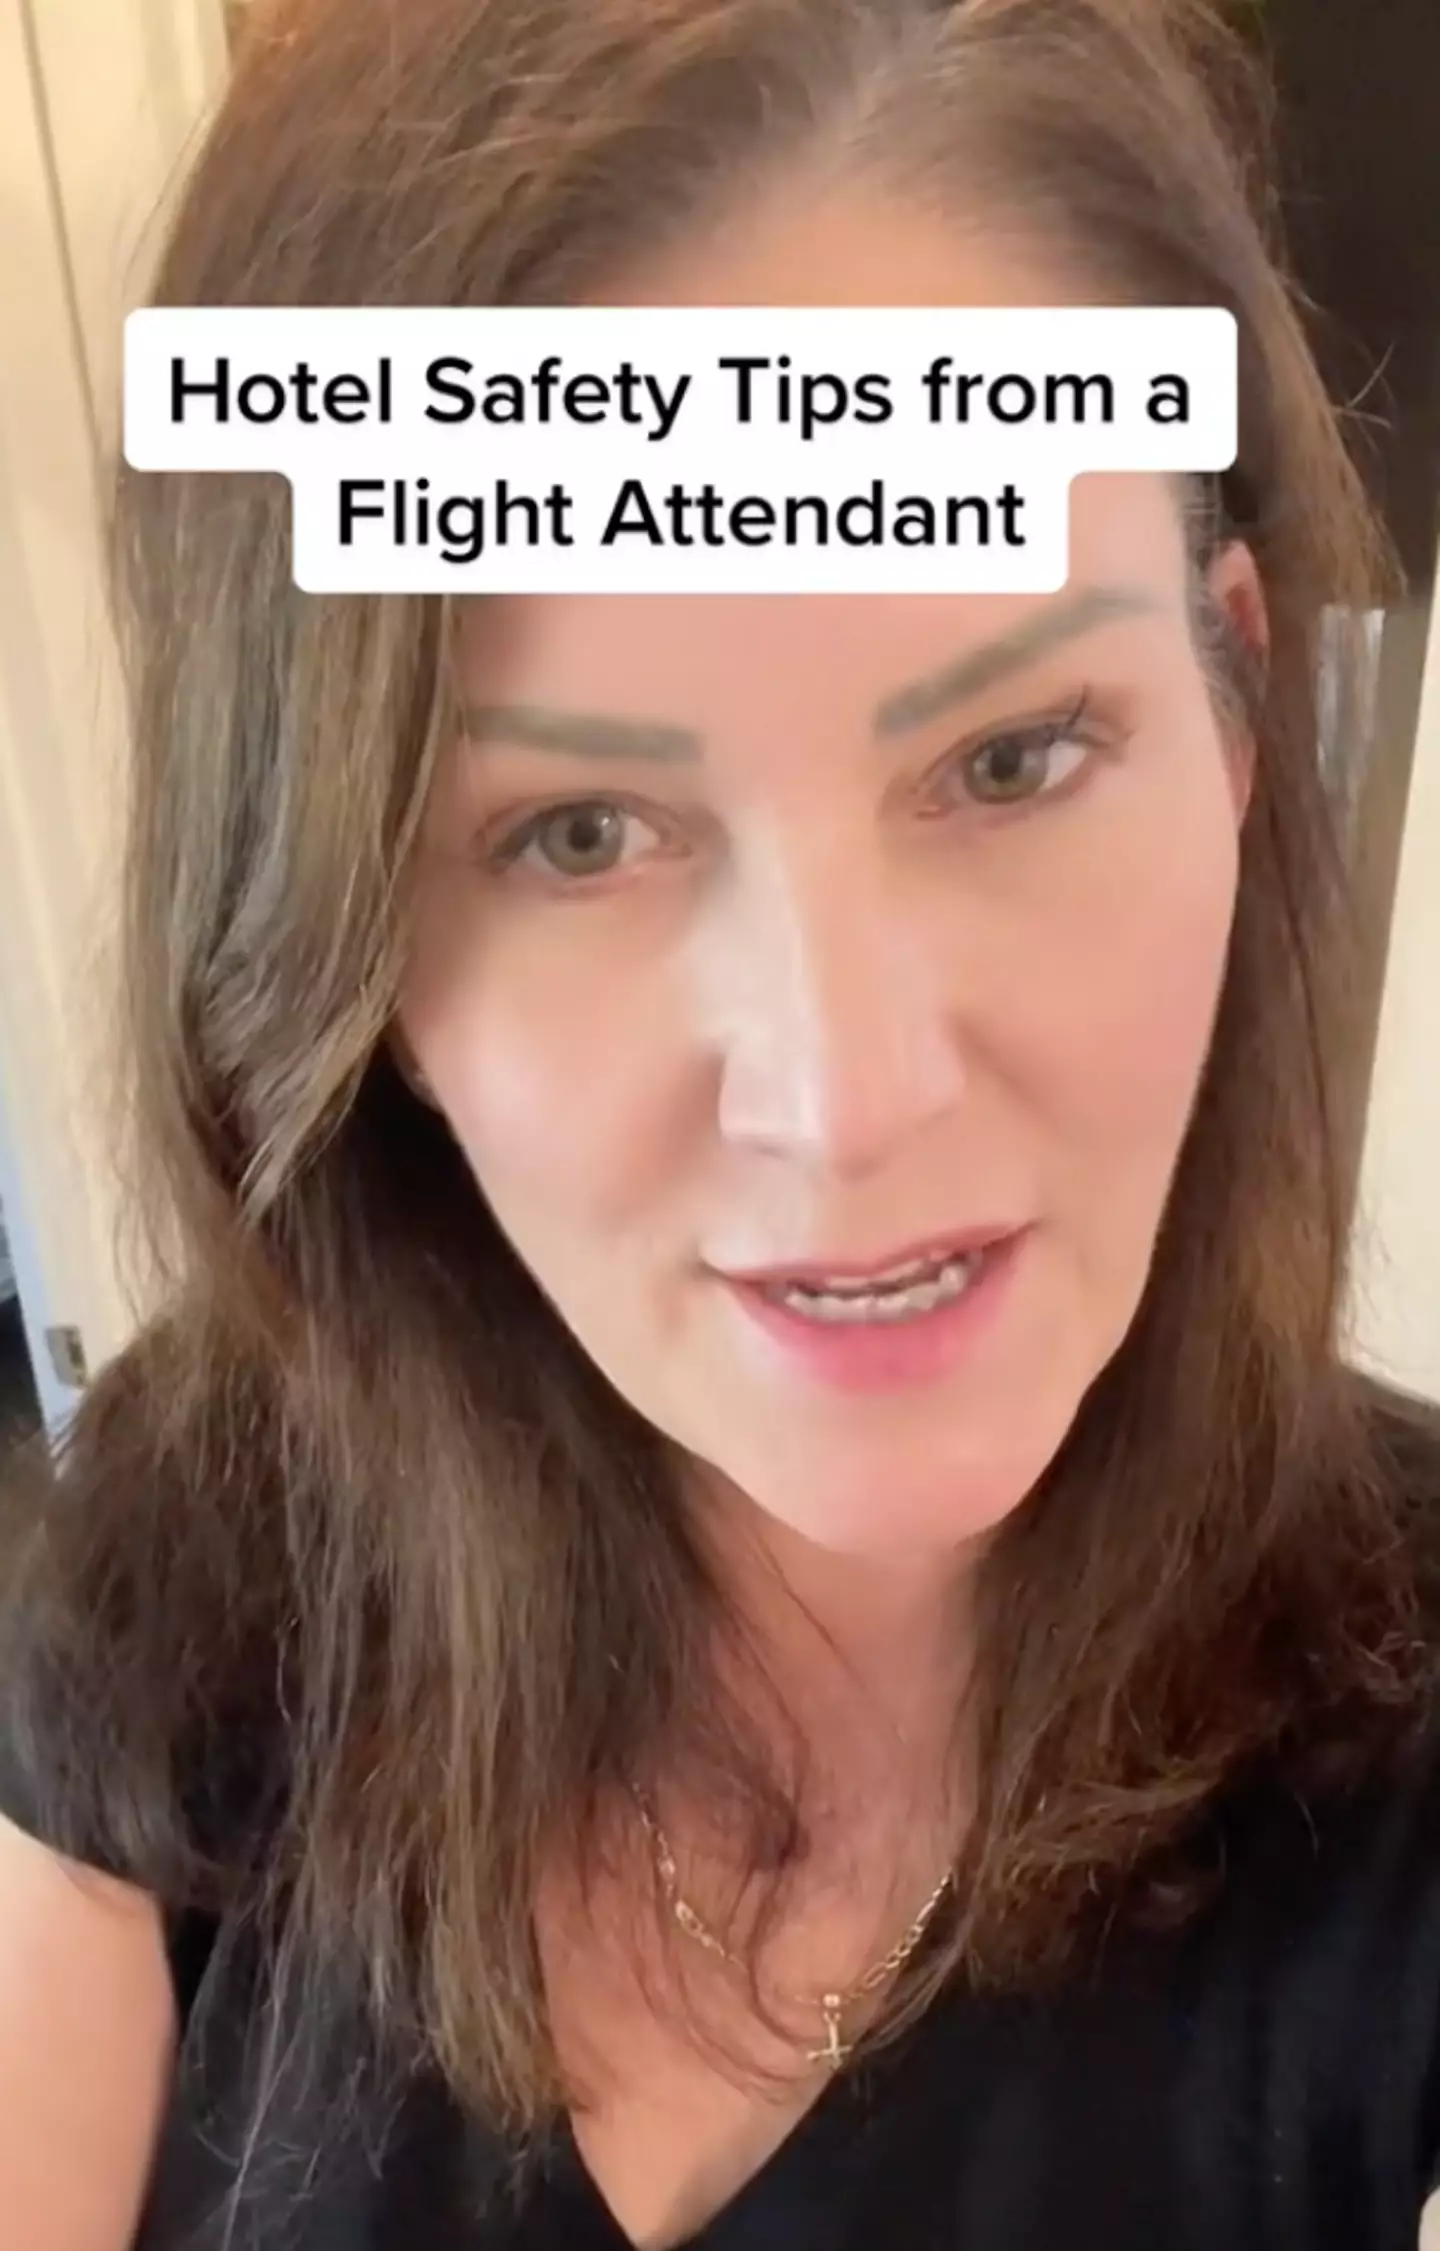 One flight attendant shared her safety tips when it comes to staying in a hotel room.